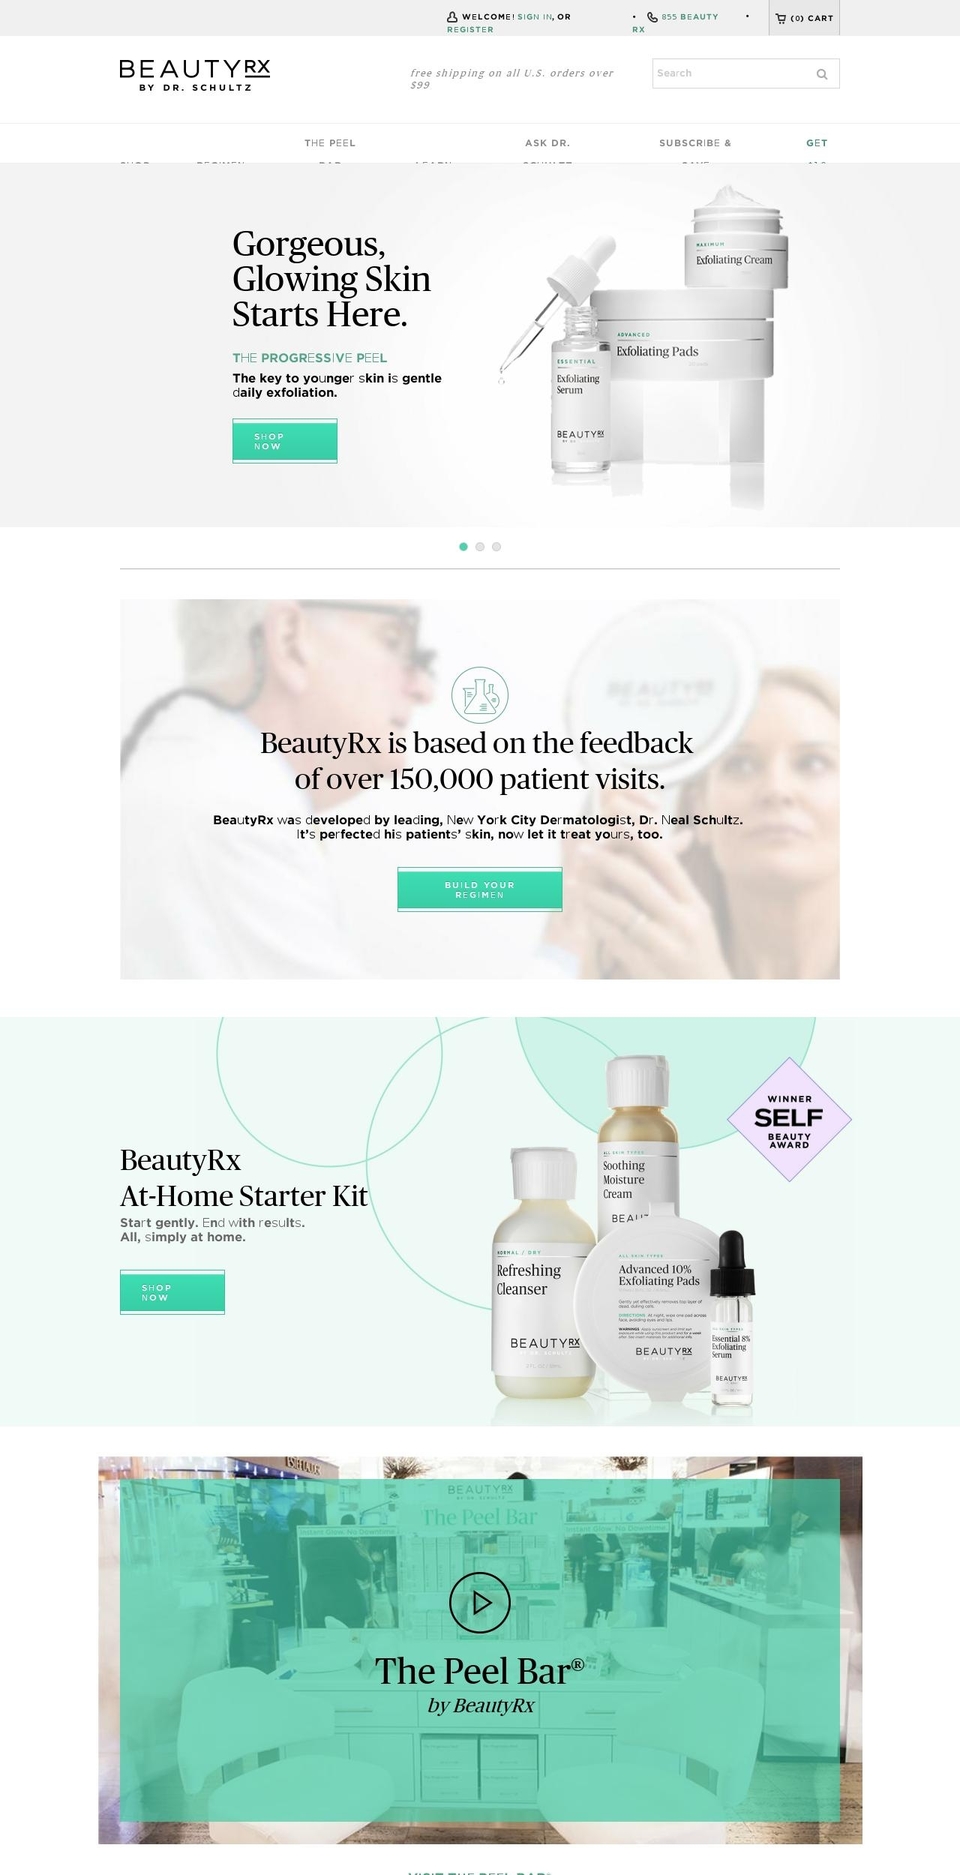 [Mob-20-Feb-18] Beauty RX [BR-248] Shopify theme site example beautyrxskincare.tv